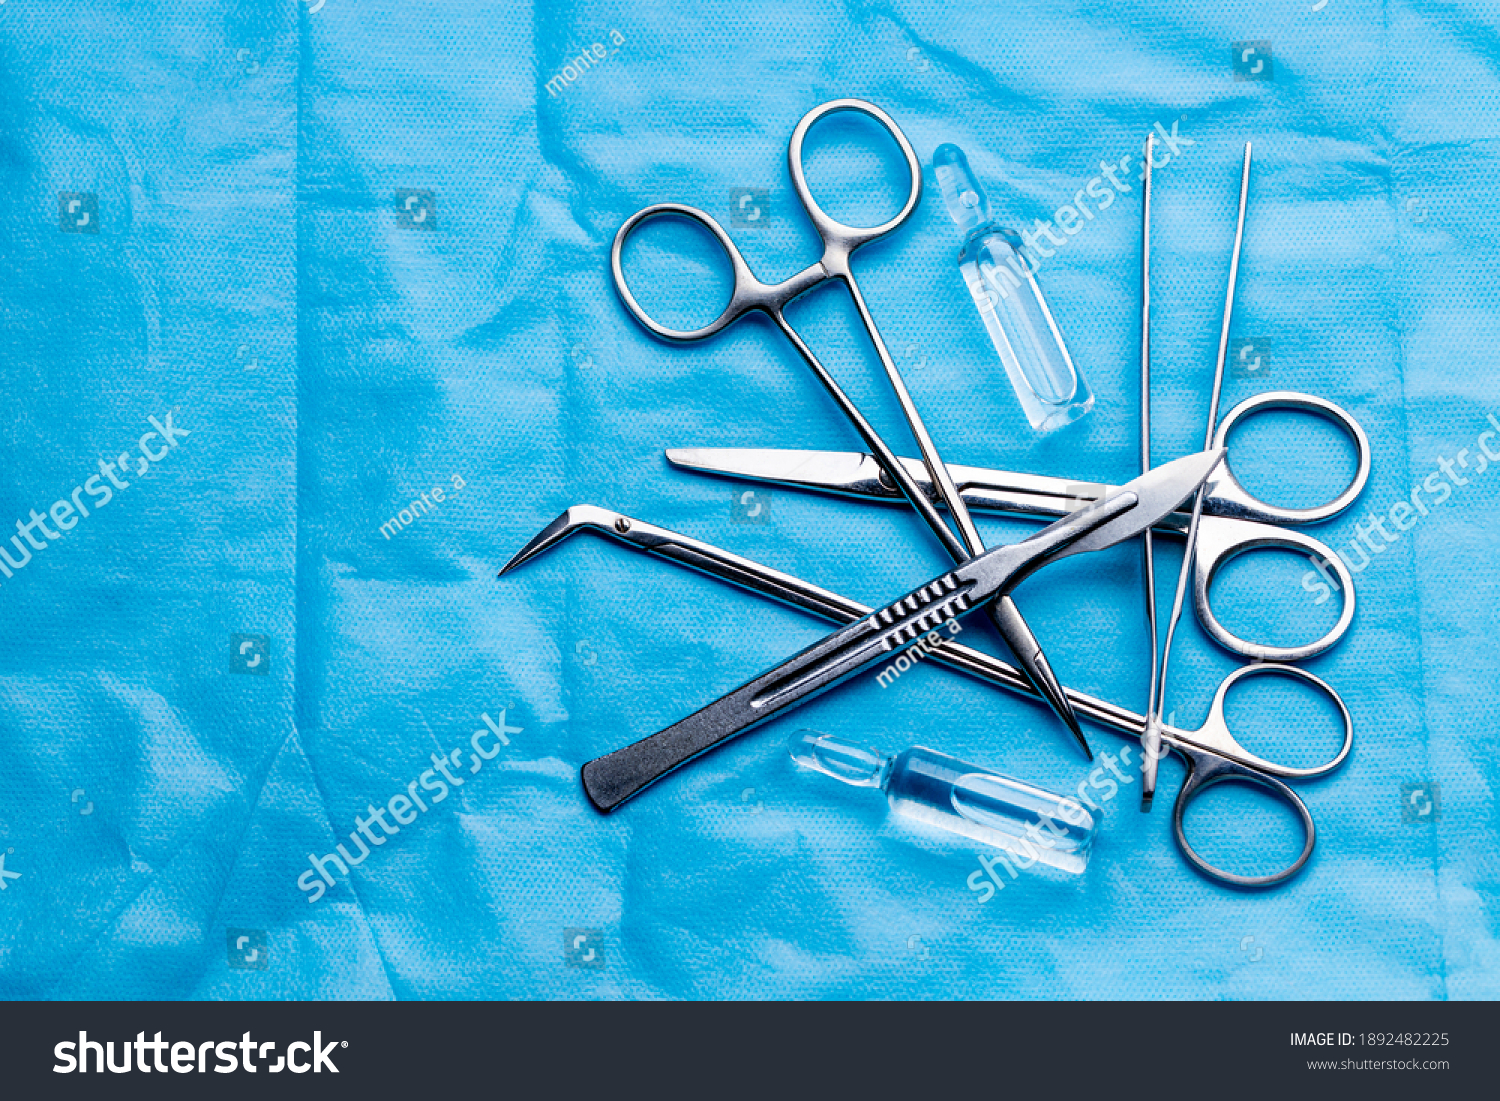 stack of surgical equipment at surgery desk. medical tools such scissors, scalpel, forceps, tweezers over blue background. surgery concept. #1892482225